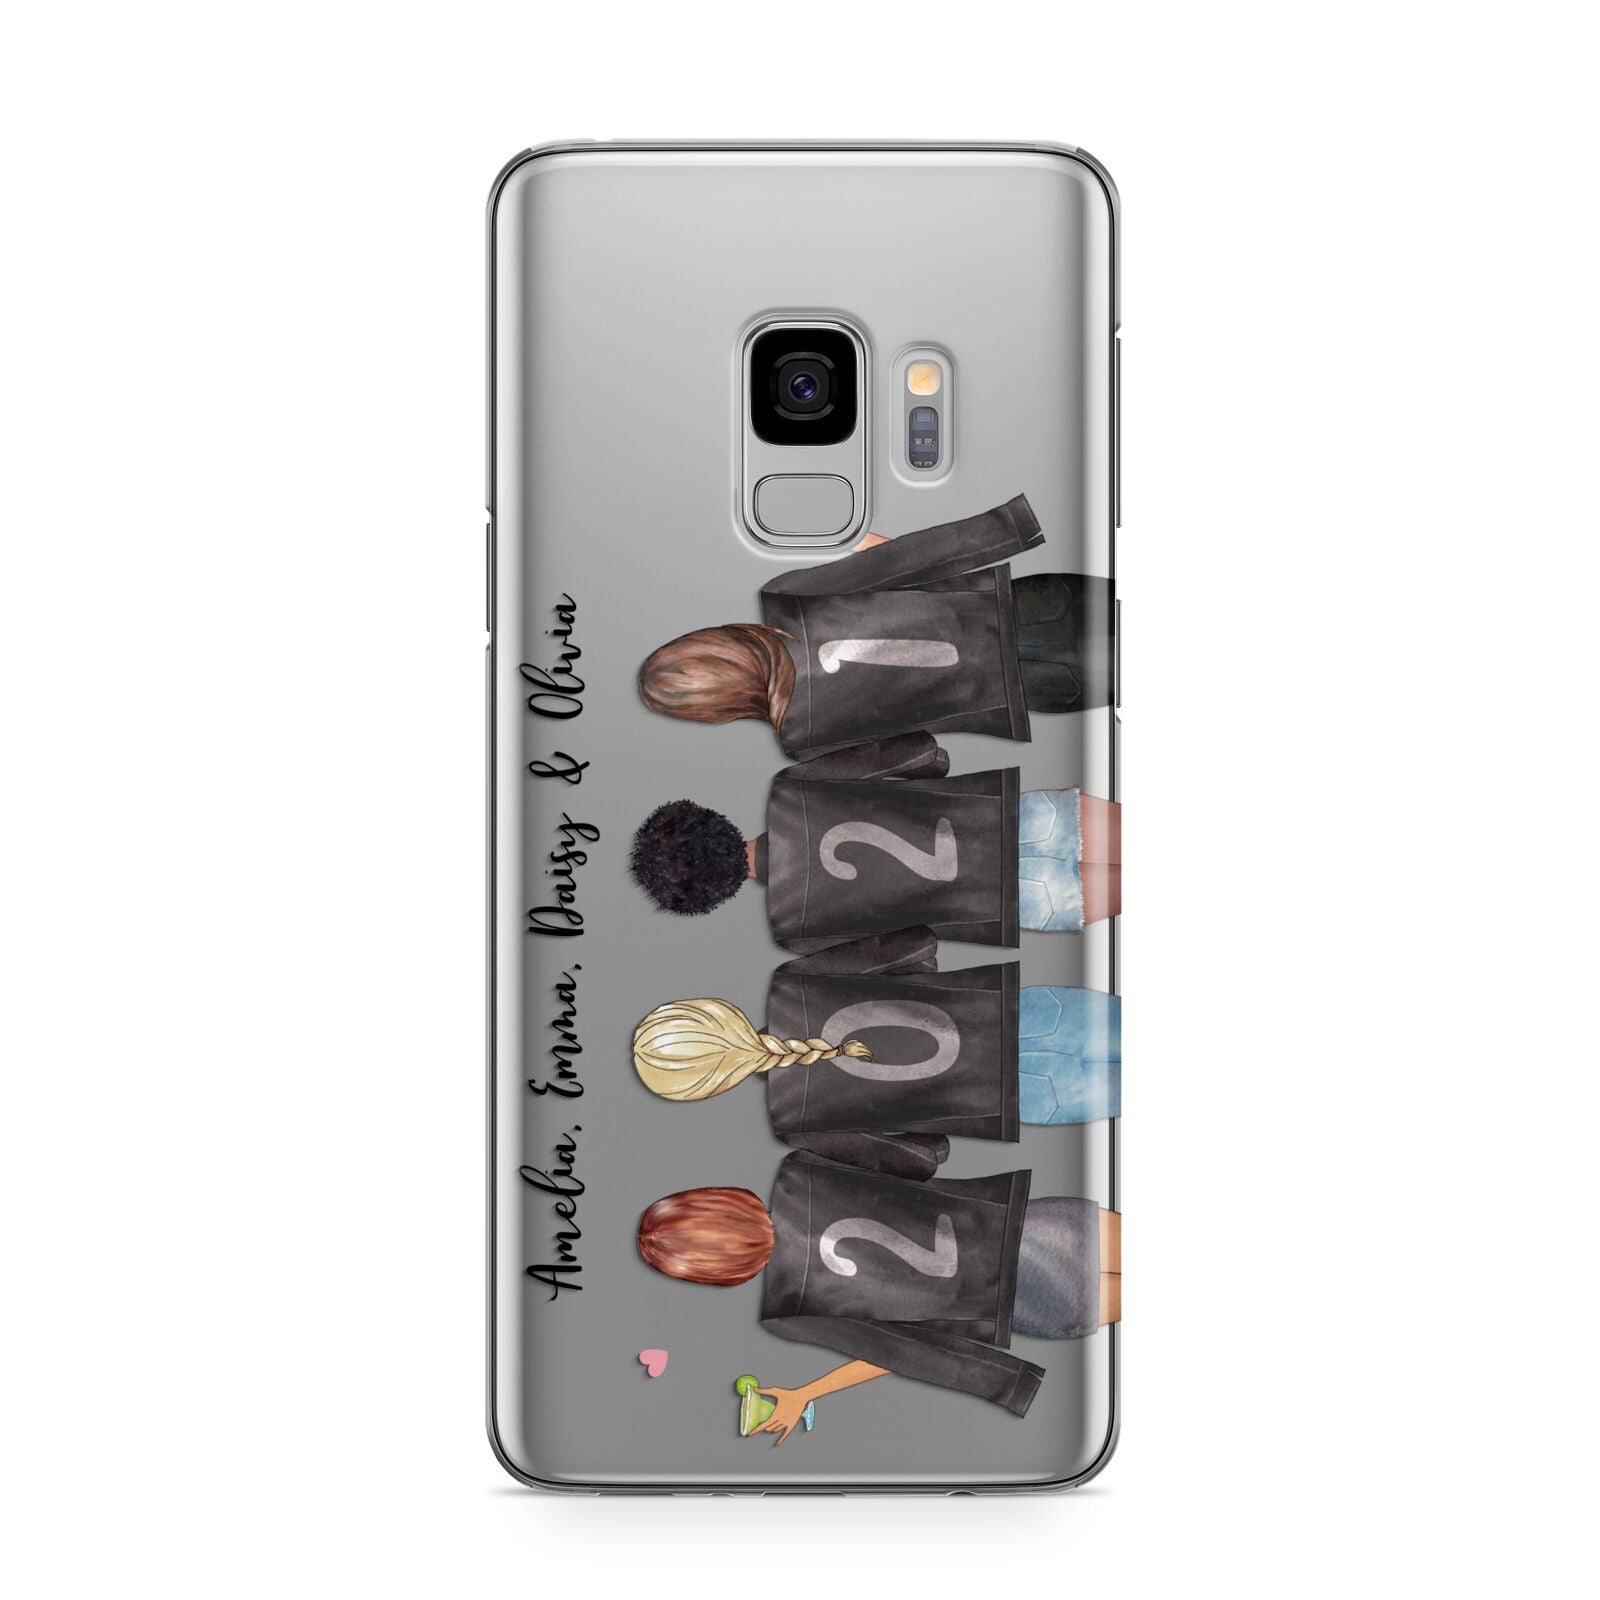 4 Best Friends with Names Samsung Galaxy S9 Case